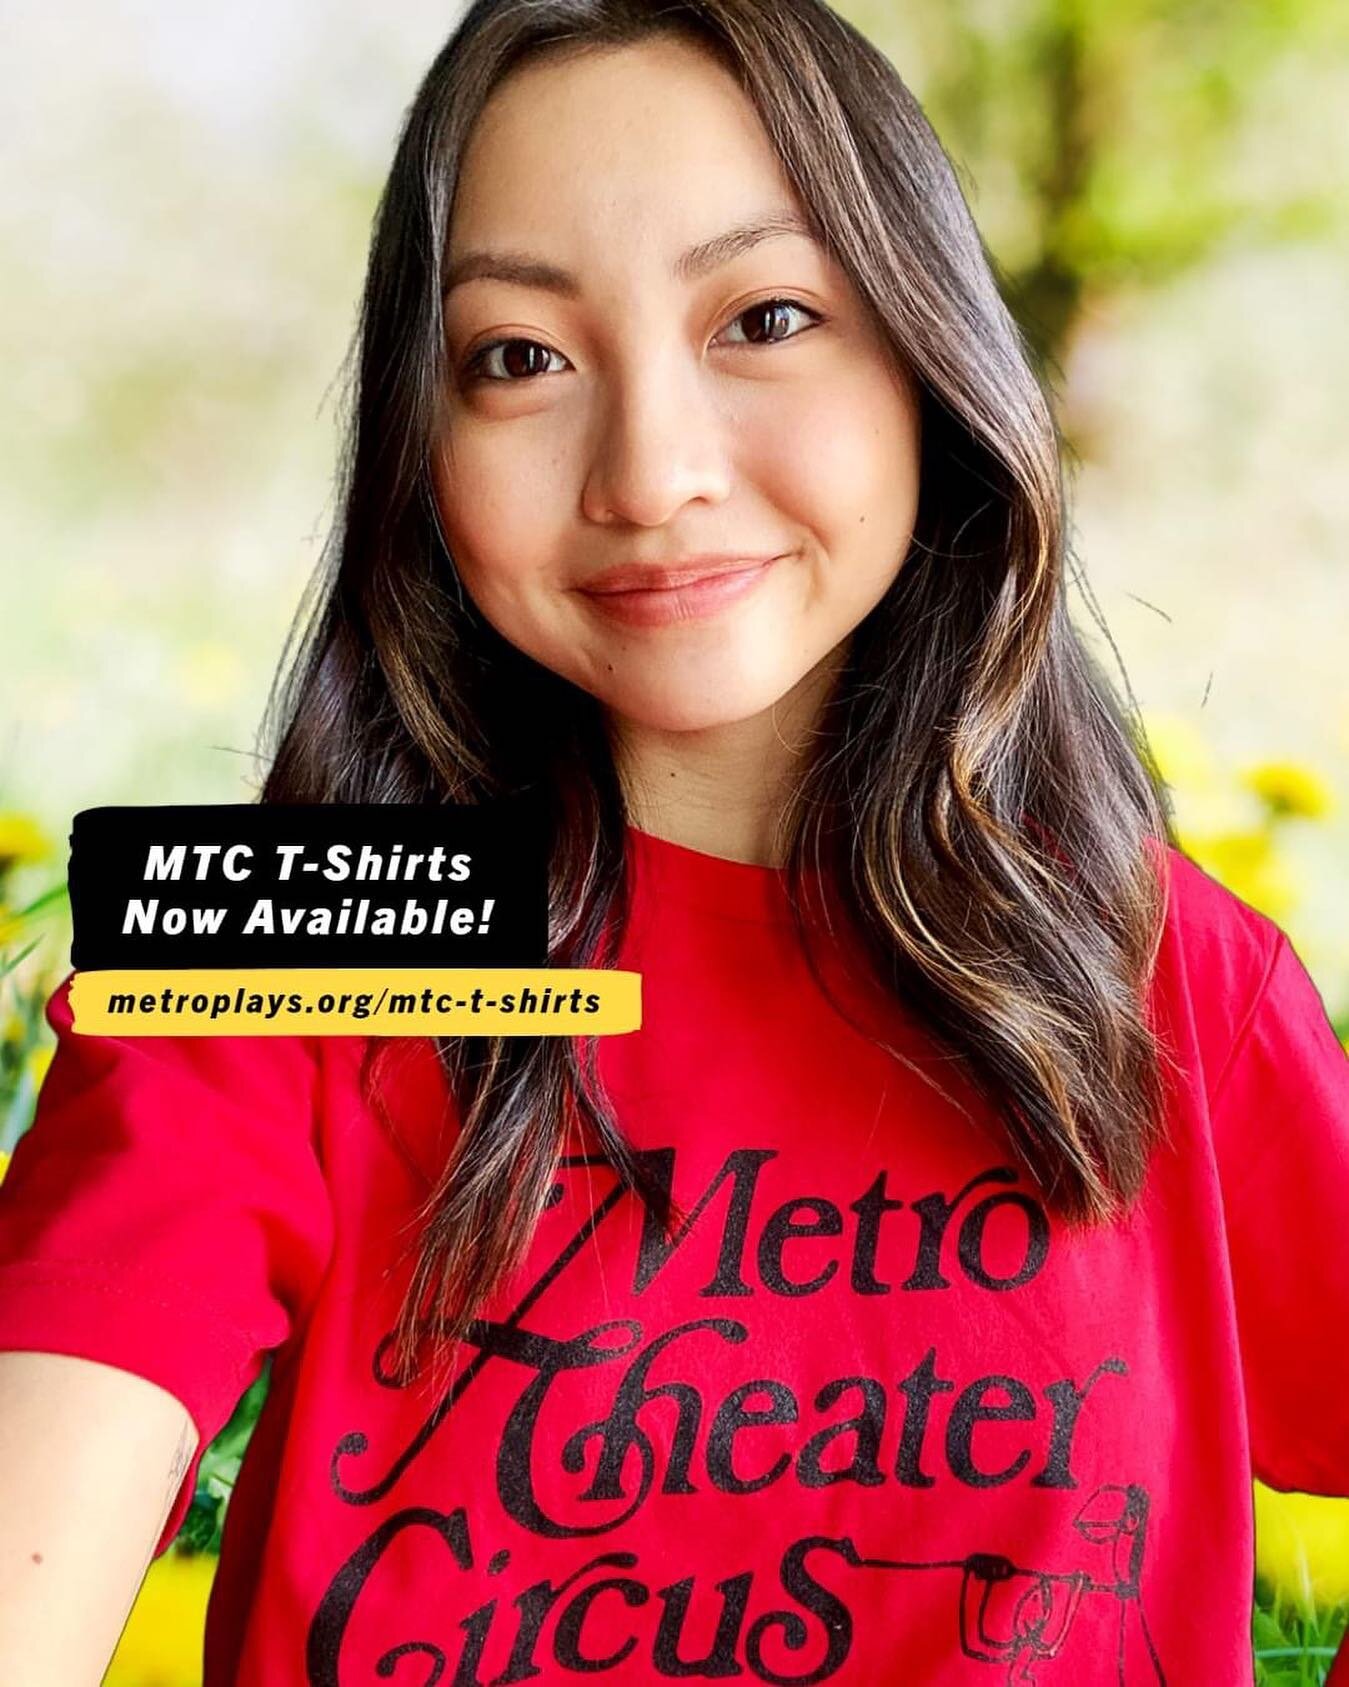 There's still time to buy a limited edition Metro Theater Company t-shirt created by @stlstylehouse! Perfect for summer! 🌻 We have 5️⃣ shirt options to choose from, including this vintage design. A portion of sales goes to support MTC's mission. 💙 